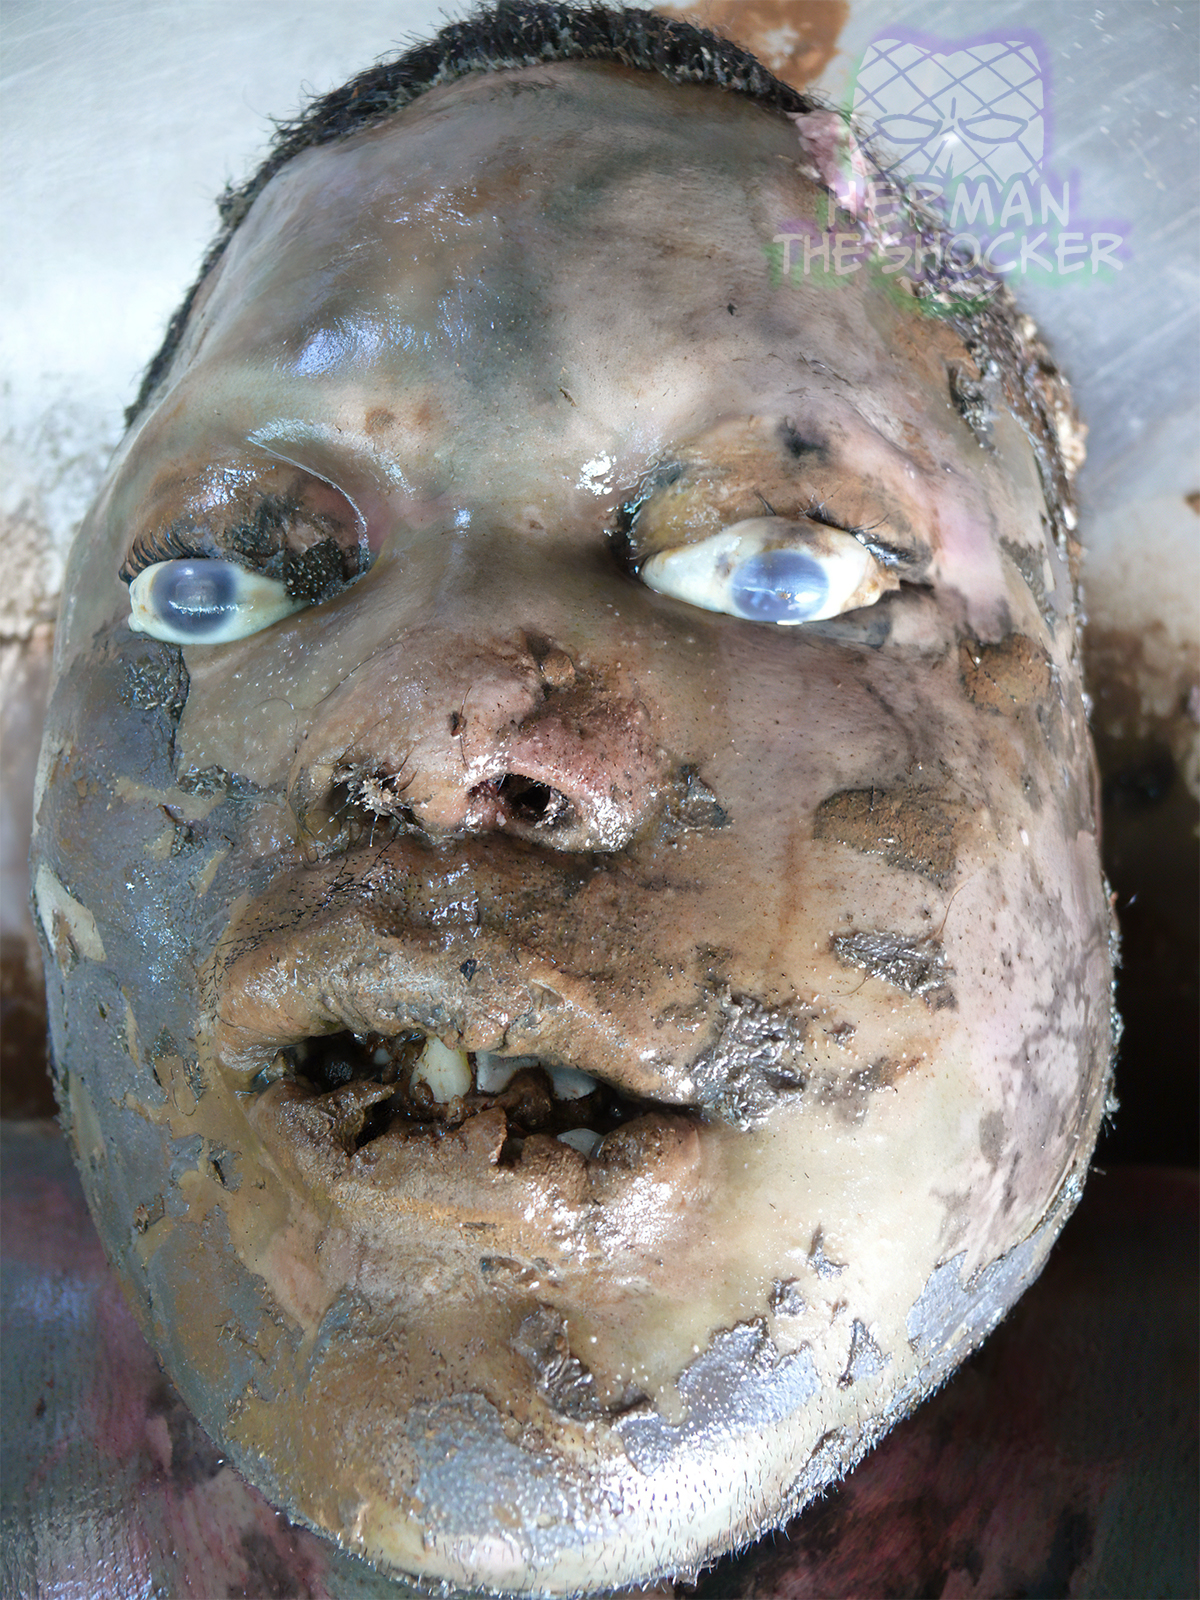 Decomposition with bloated facial features